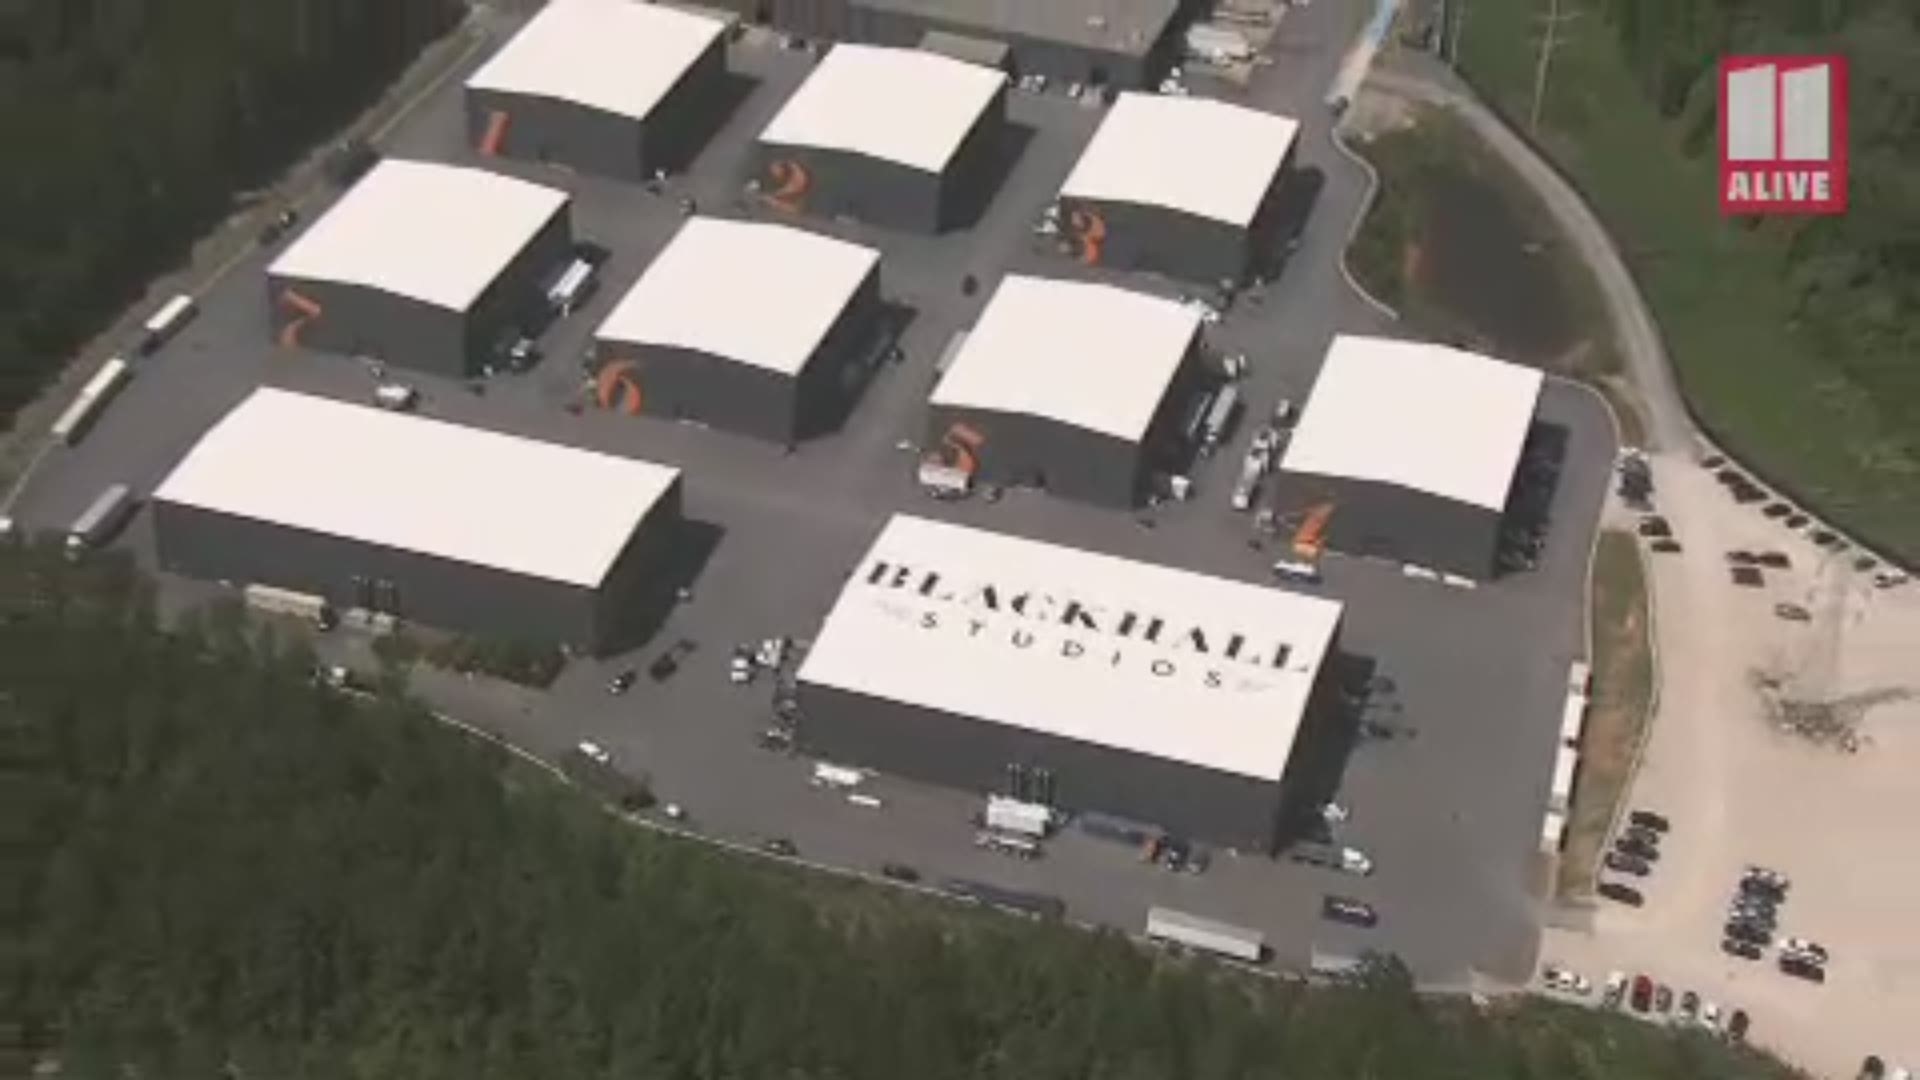 A look at Blackhall Studios and its production sound stages in Atlanta from above in SkyTracker11 on Sept. 5, 2019.